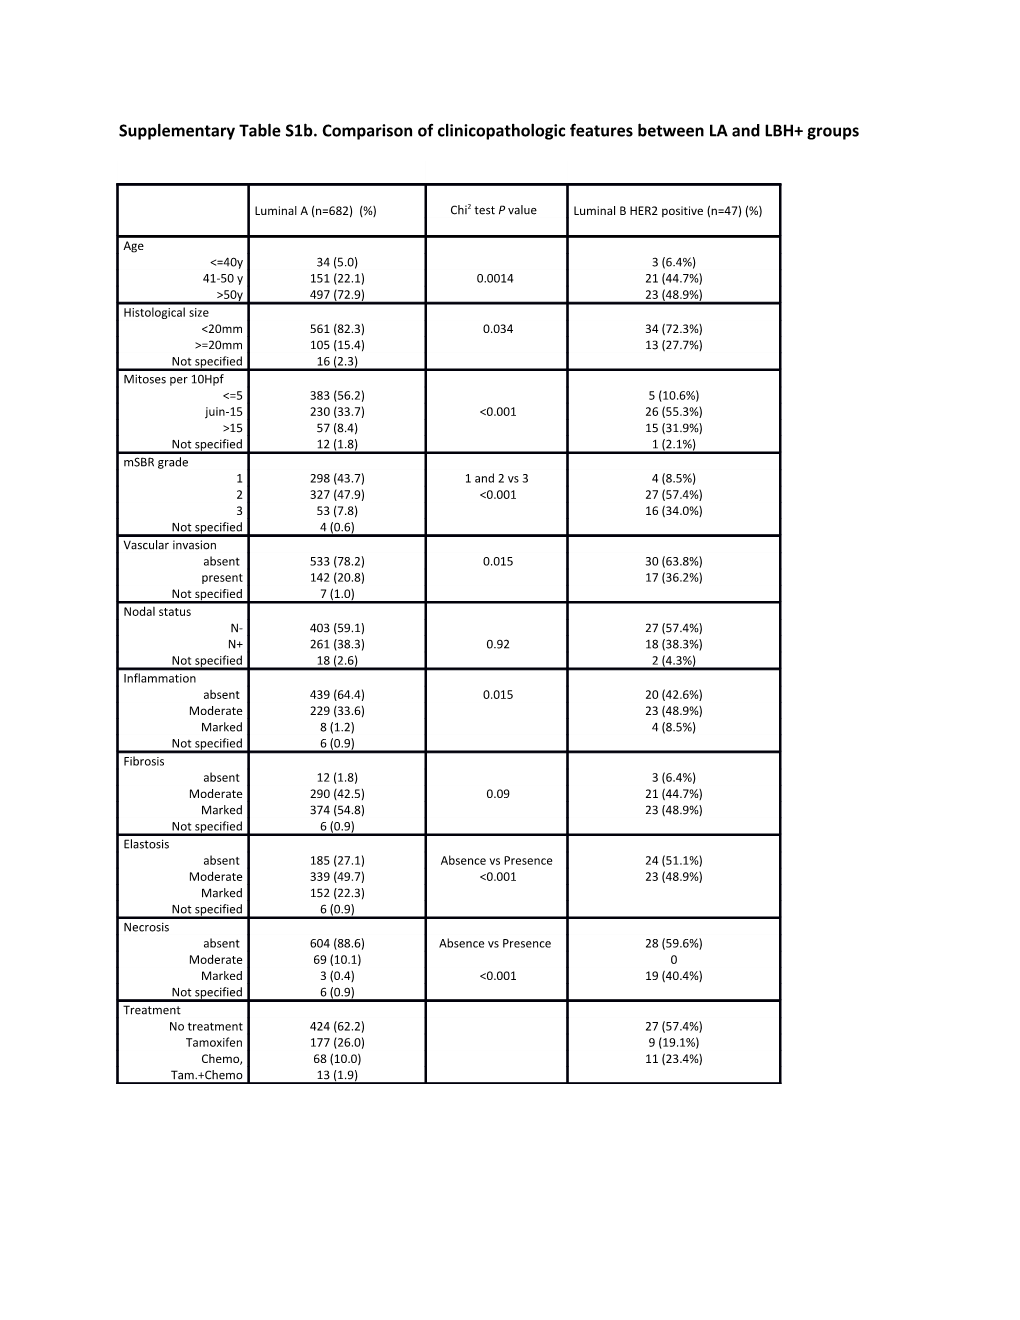 Supplementary Table S1a.Comparison of Clinicopathologic Features Between LA and LBH- Groups